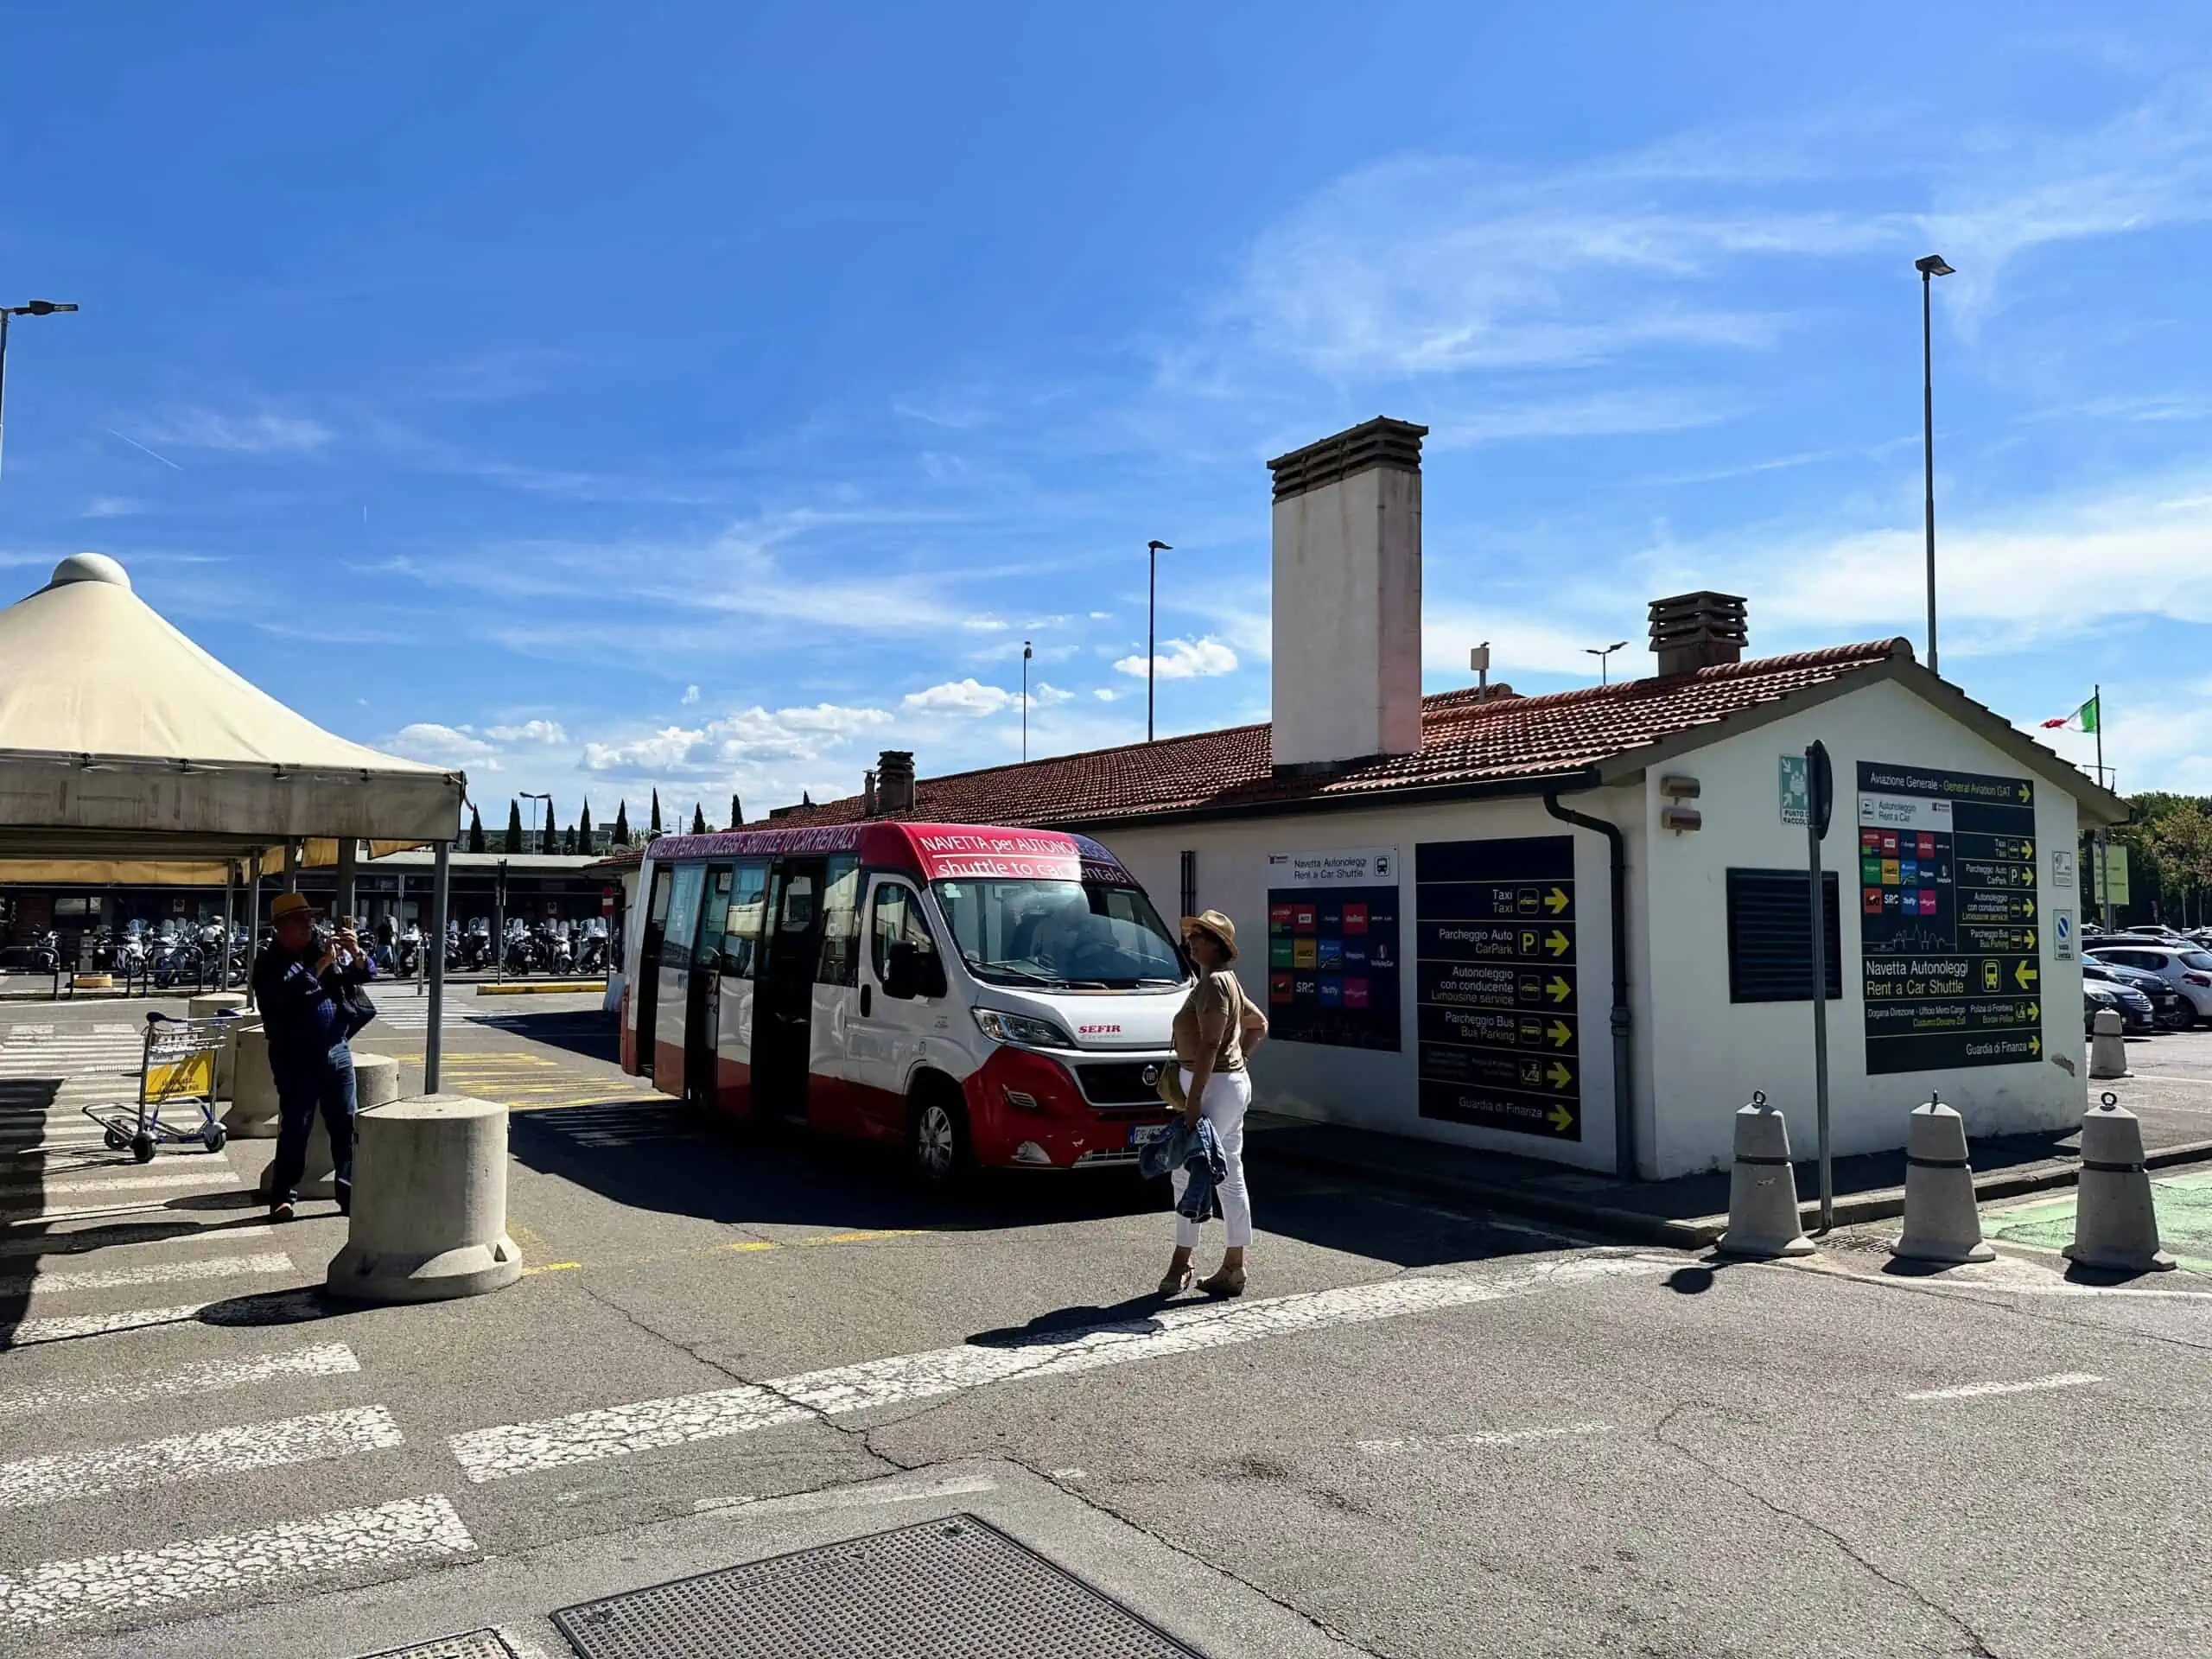 A couple is waiting next to a white and red shuttle bus at the Florence airport. There is a waiting area with a tent on the left and a small building next to the bus on the right.